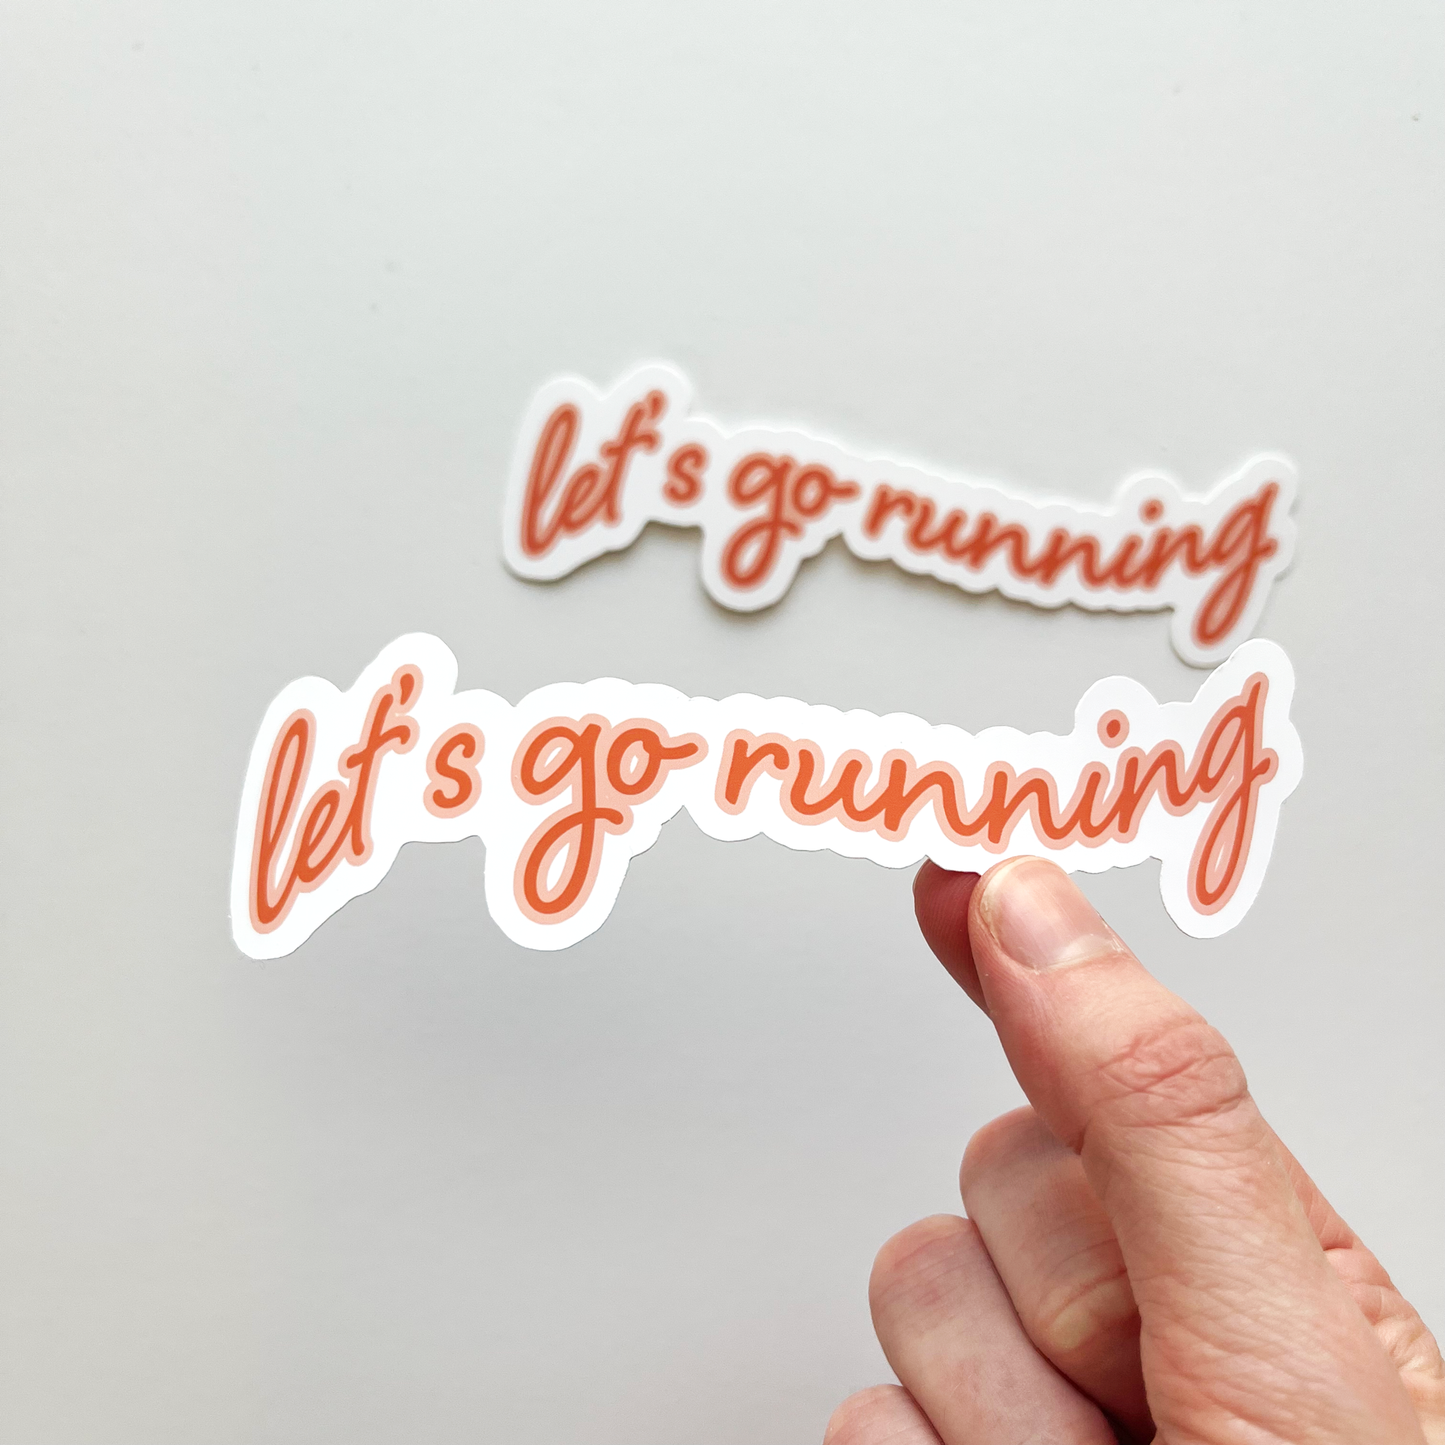 Let's go running sticker in deep orange text and a peach outline follow by white background